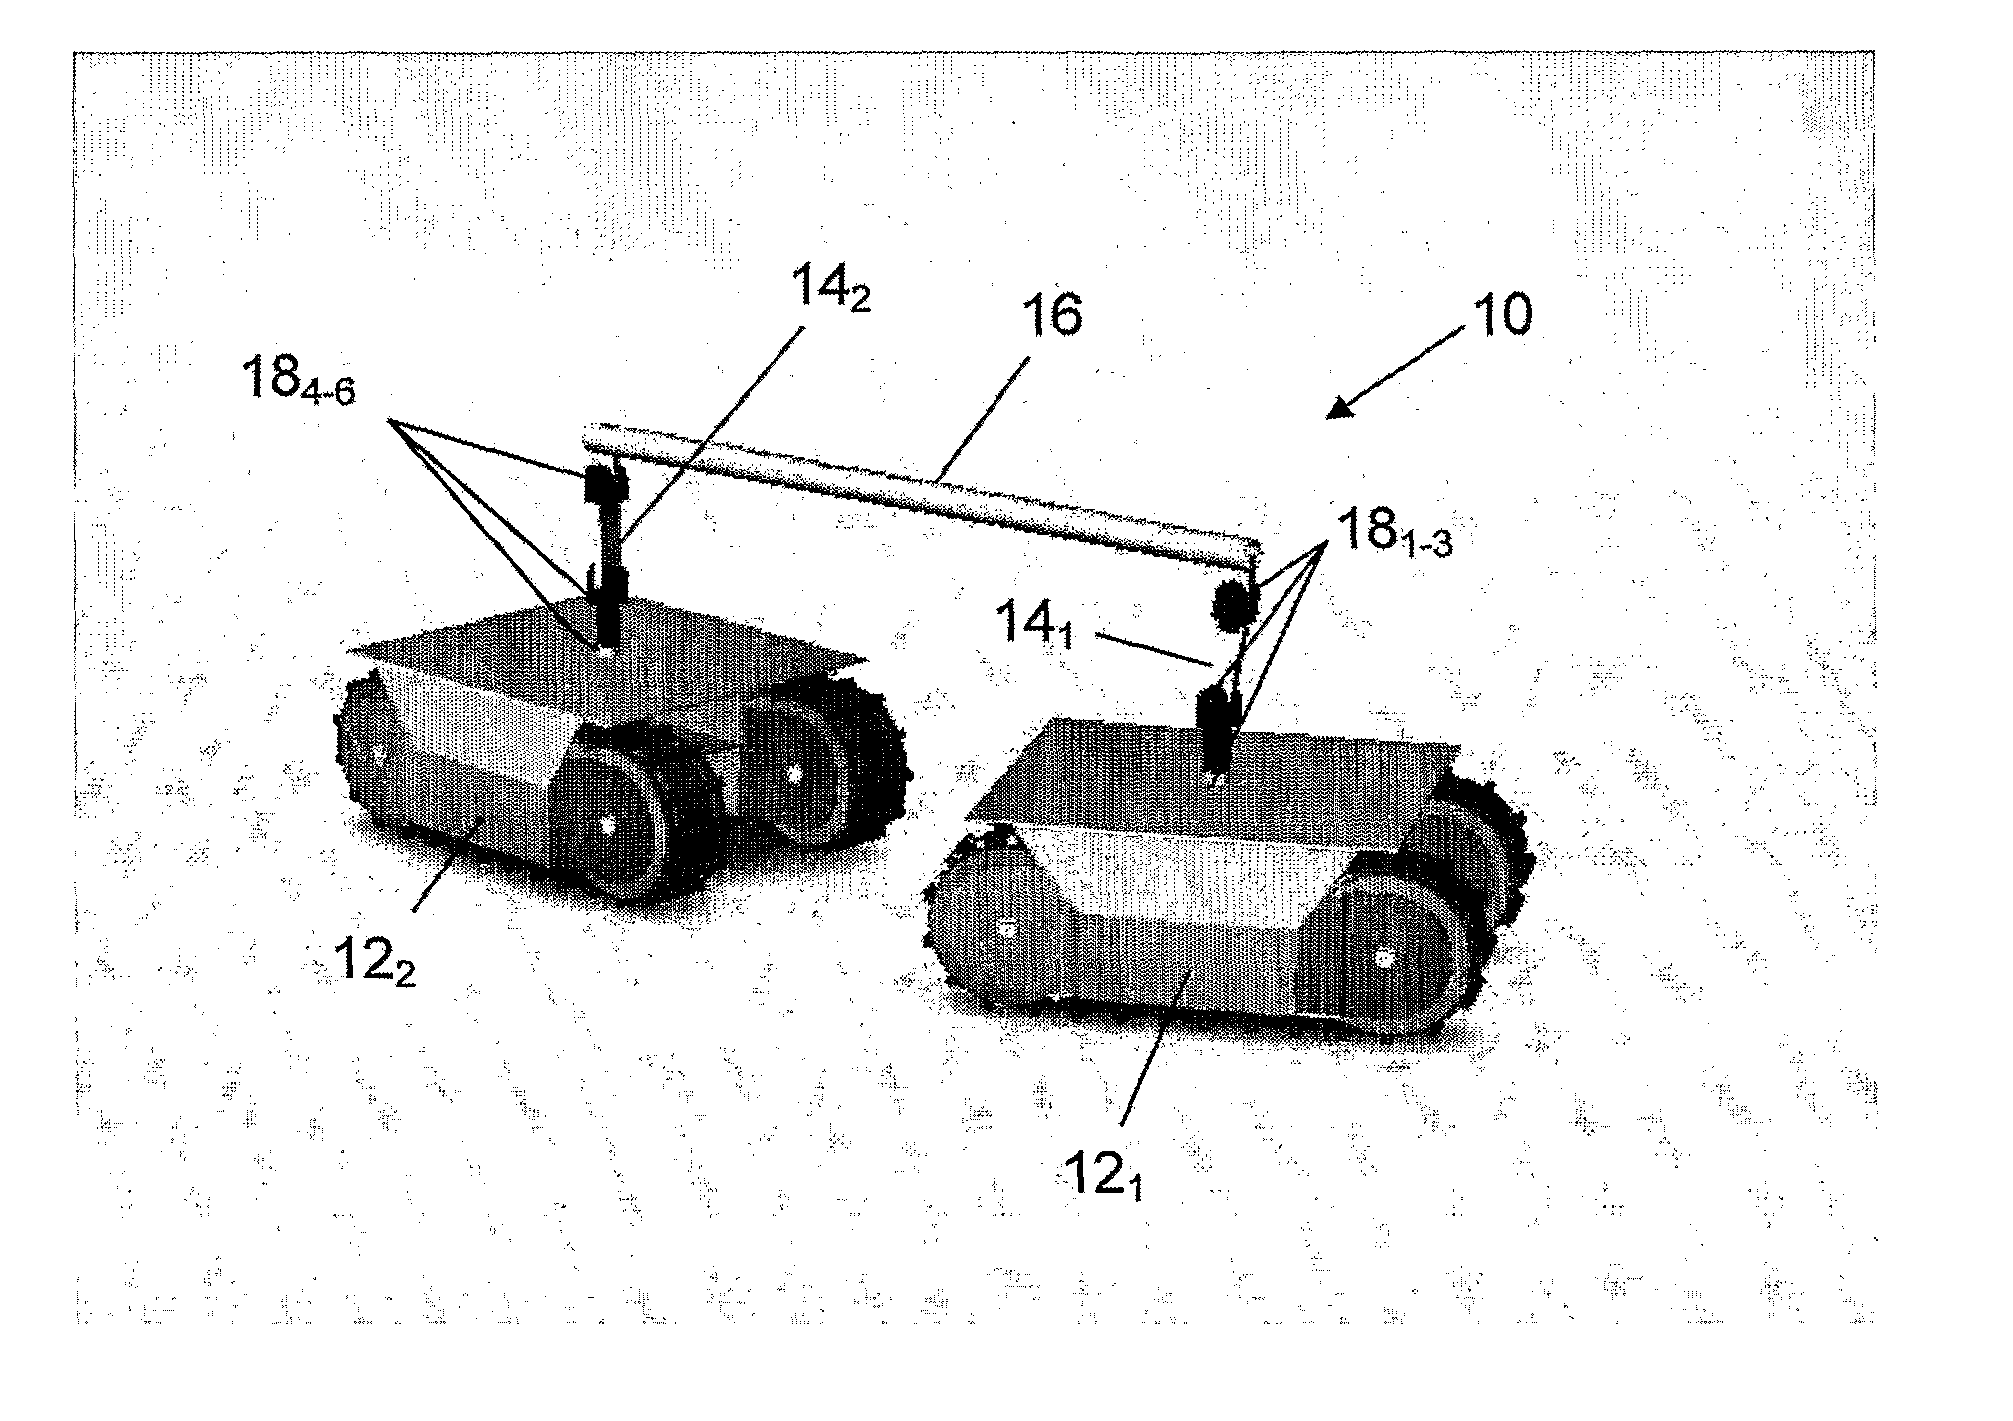 Dual tracked mobile robot for motion in rough terrain